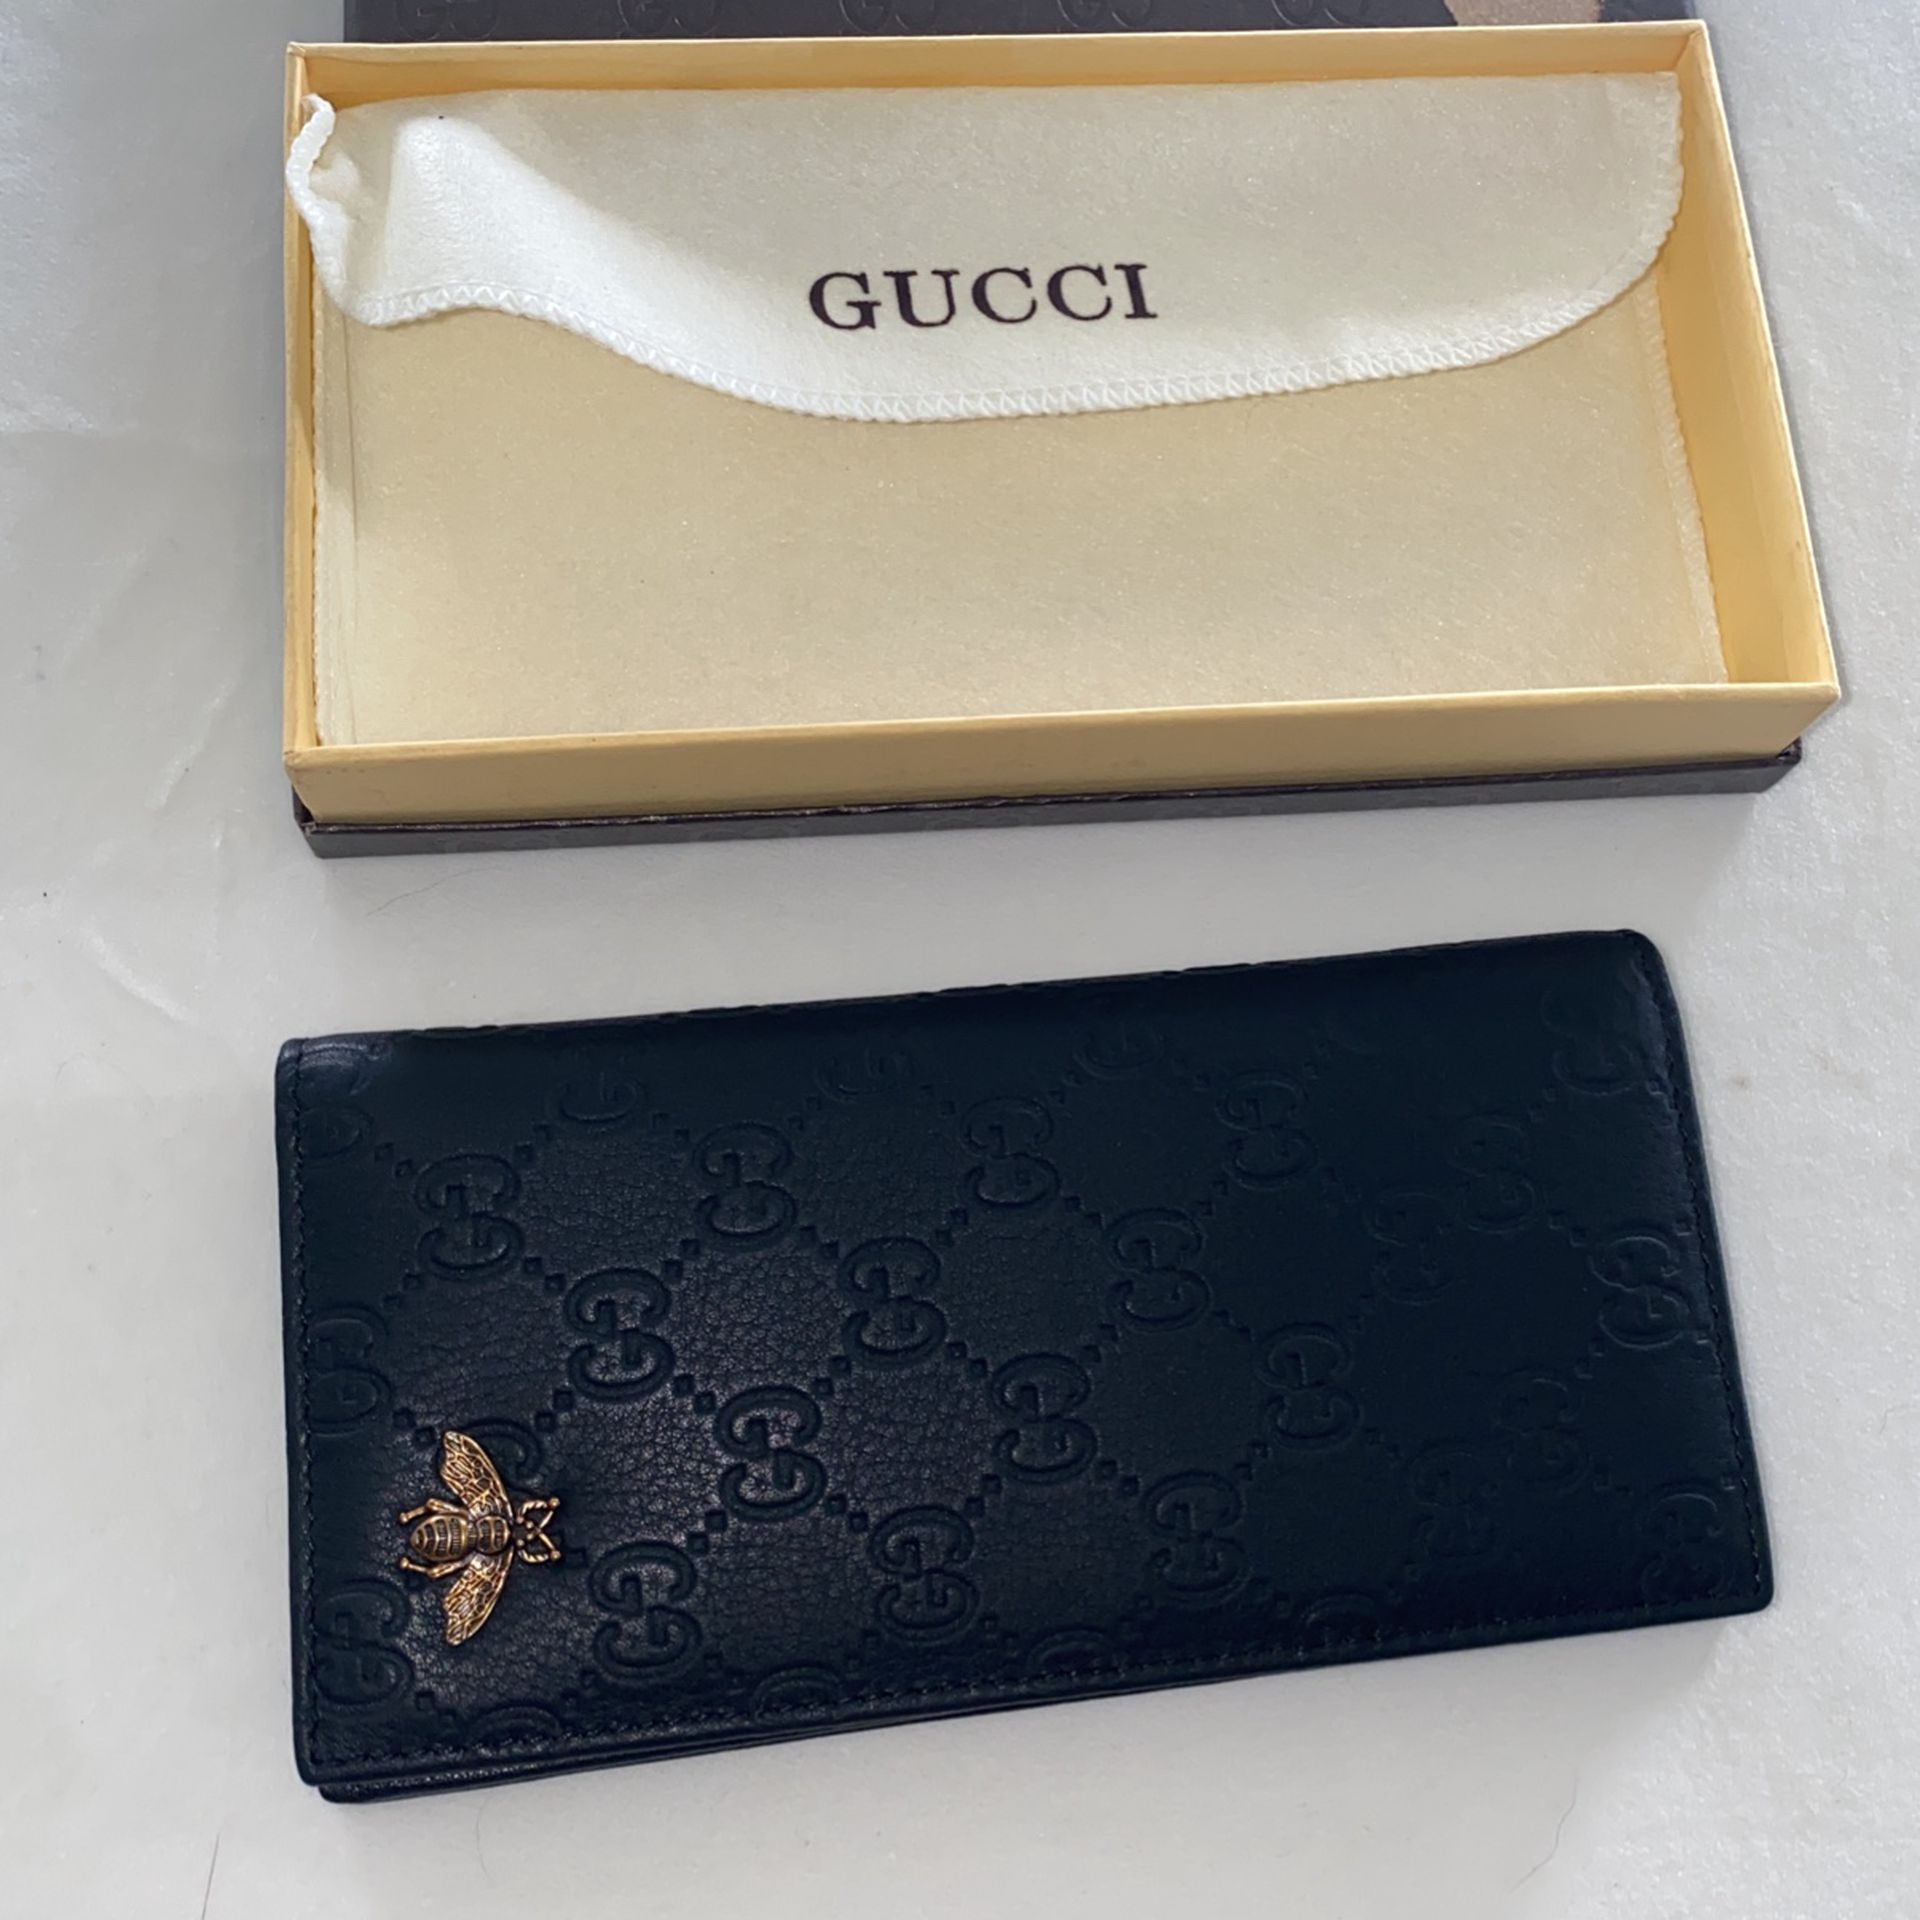 Gucci Women’s Wallet. Black With Bee 